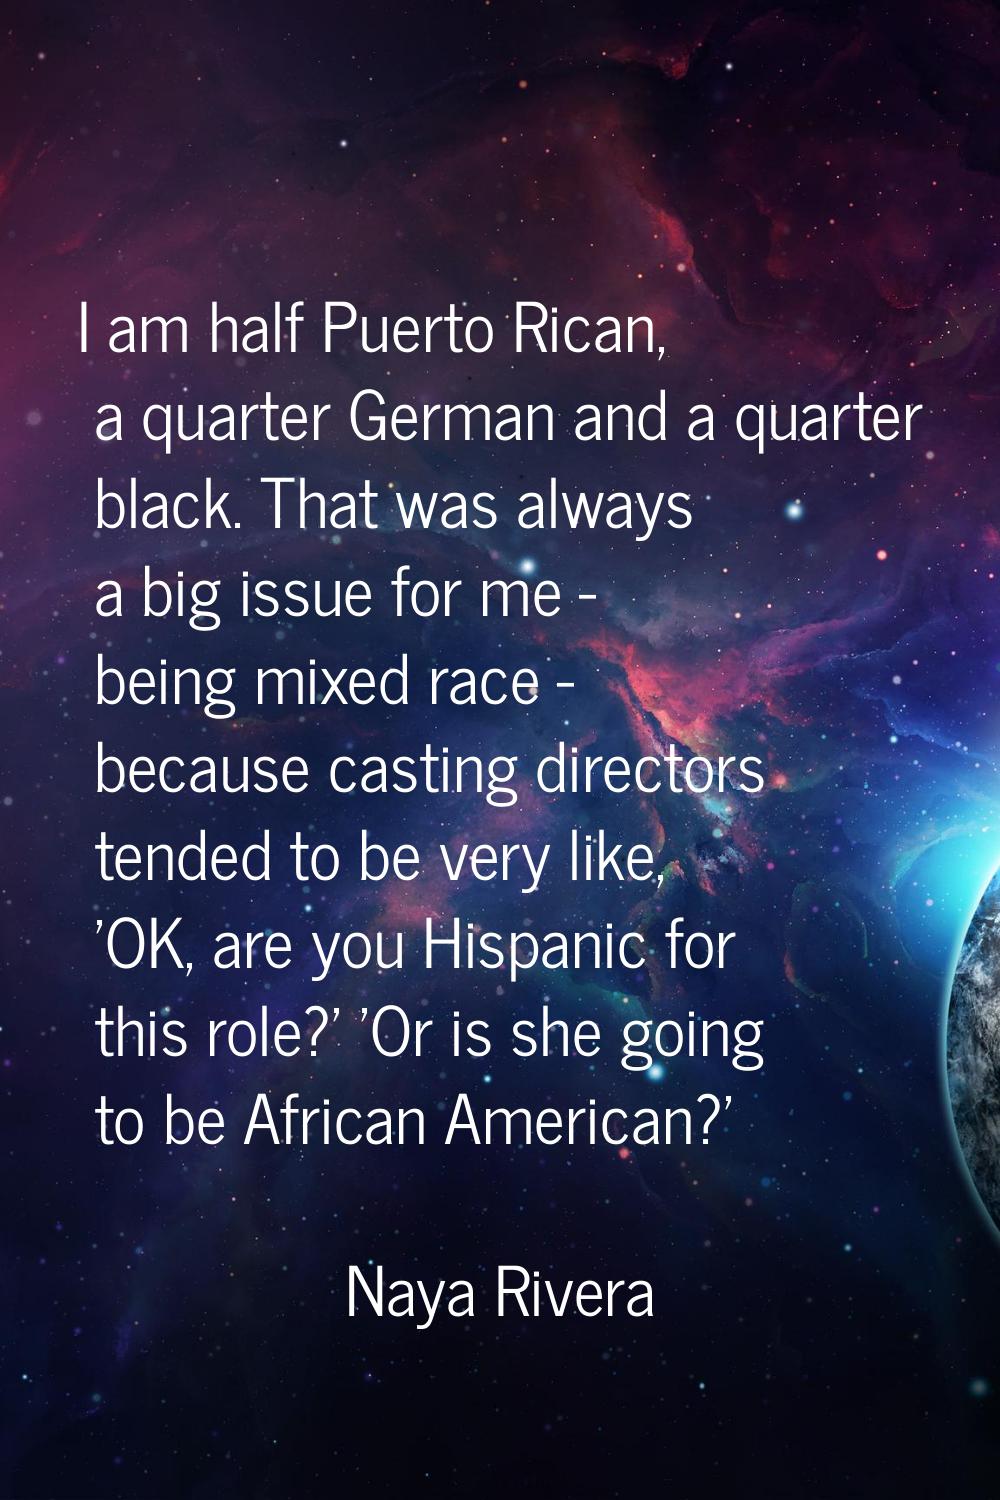 I am half Puerto Rican, a quarter German and a quarter black. That was always a big issue for me - 